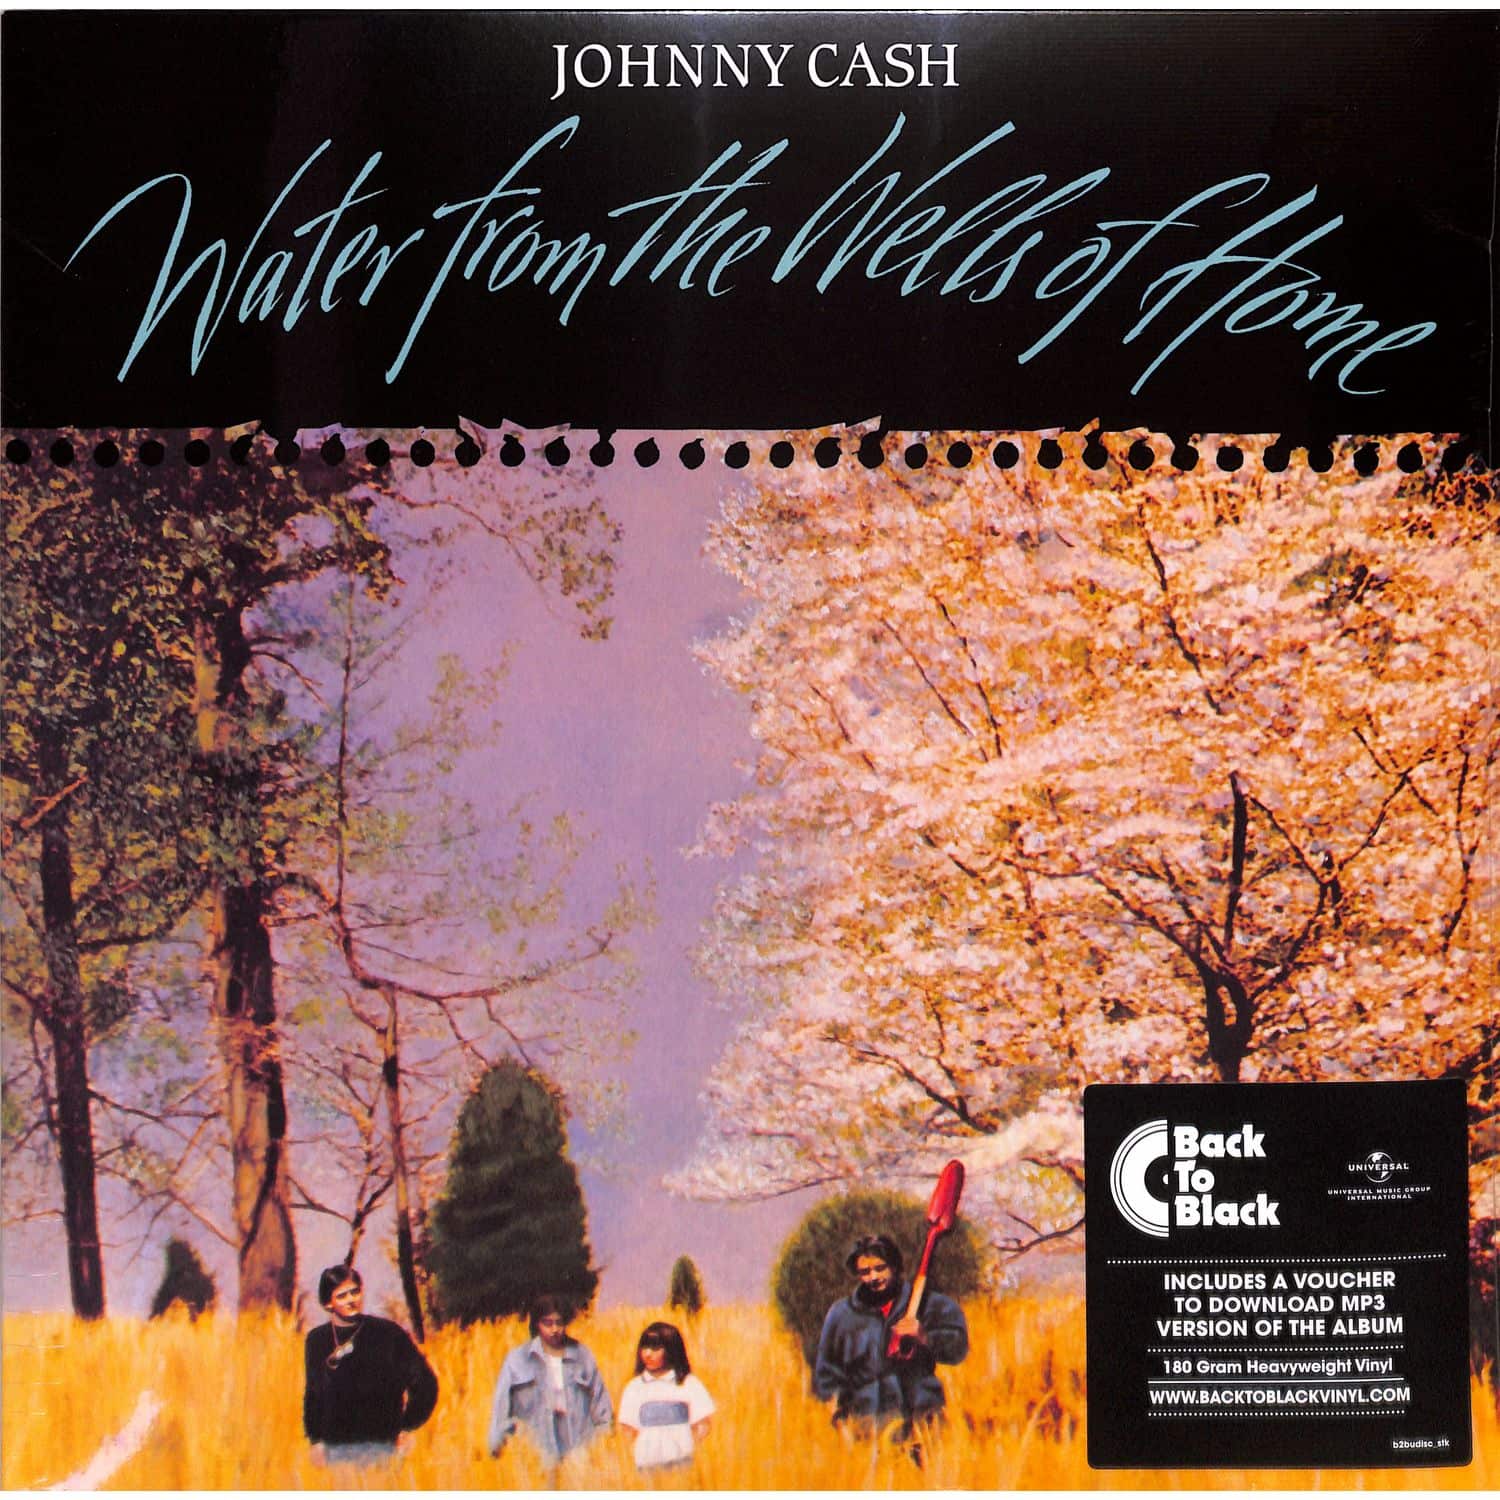 Johnny Cash - WATER FROM THE WELLS OF HOME 